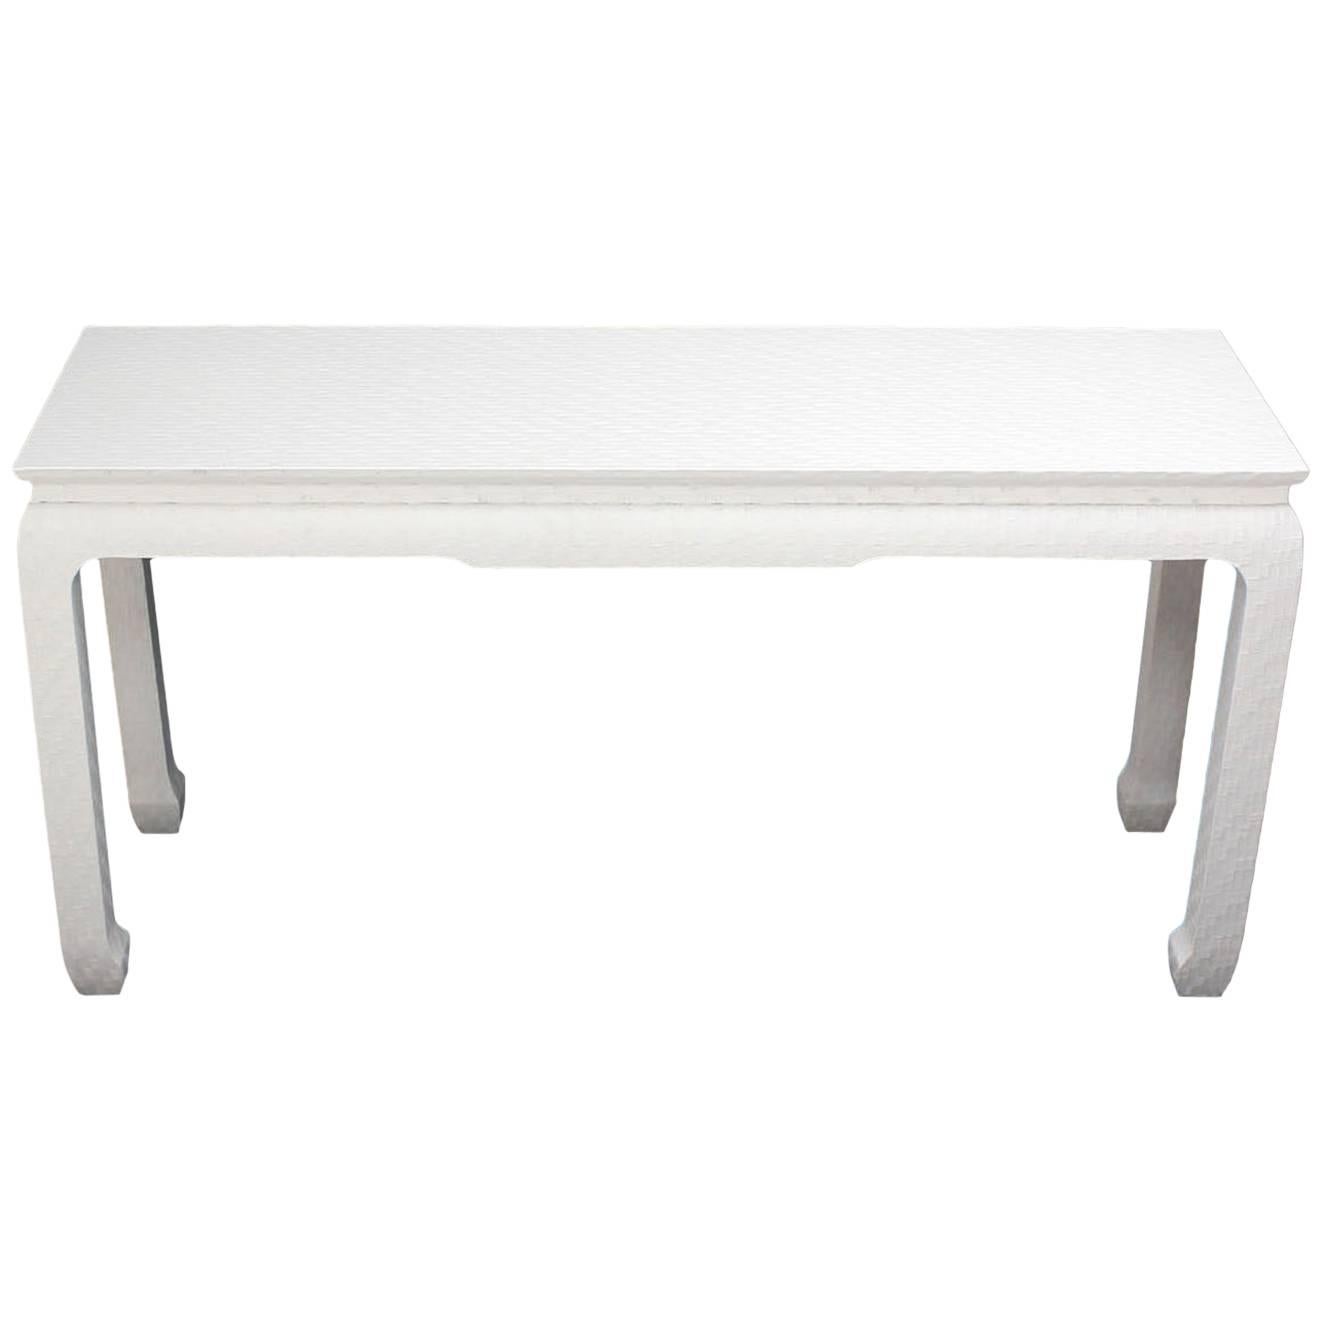 Grass Cloth Raffia Covered White Lacquer Console Sofa Table by Baker